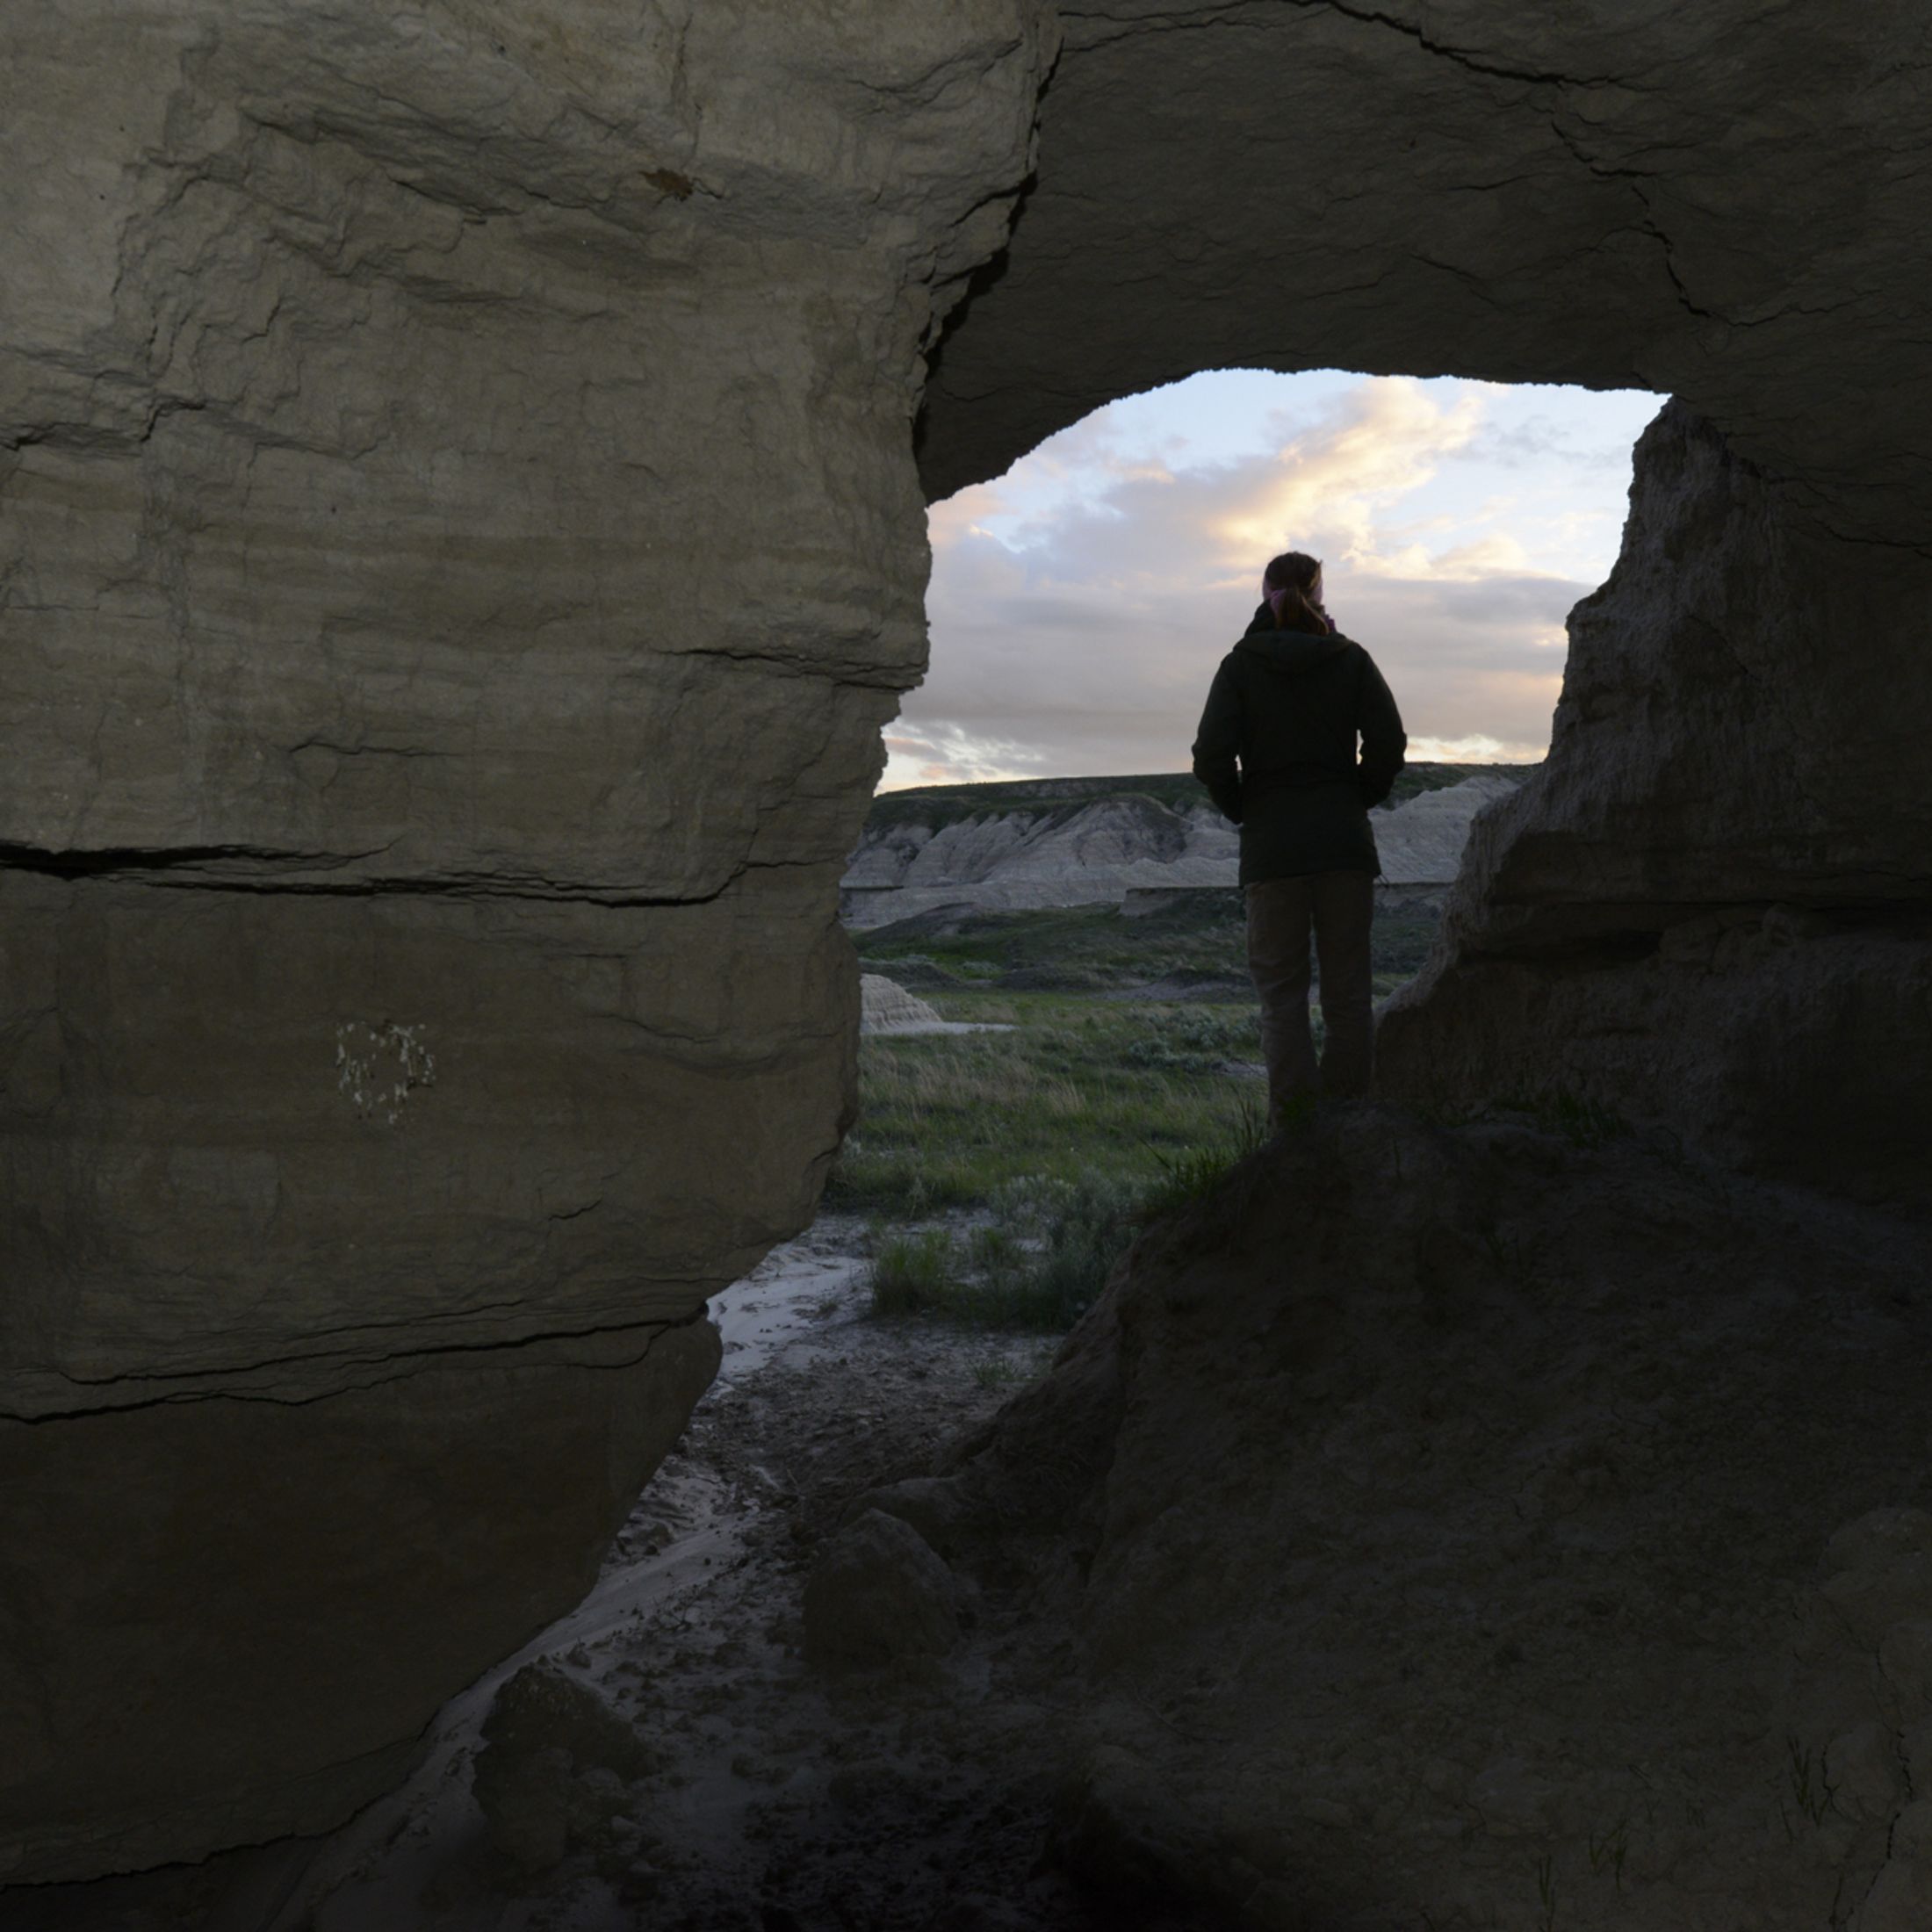 A person stands in a rocky outcrop and looks out over the Conata Basin prairie.